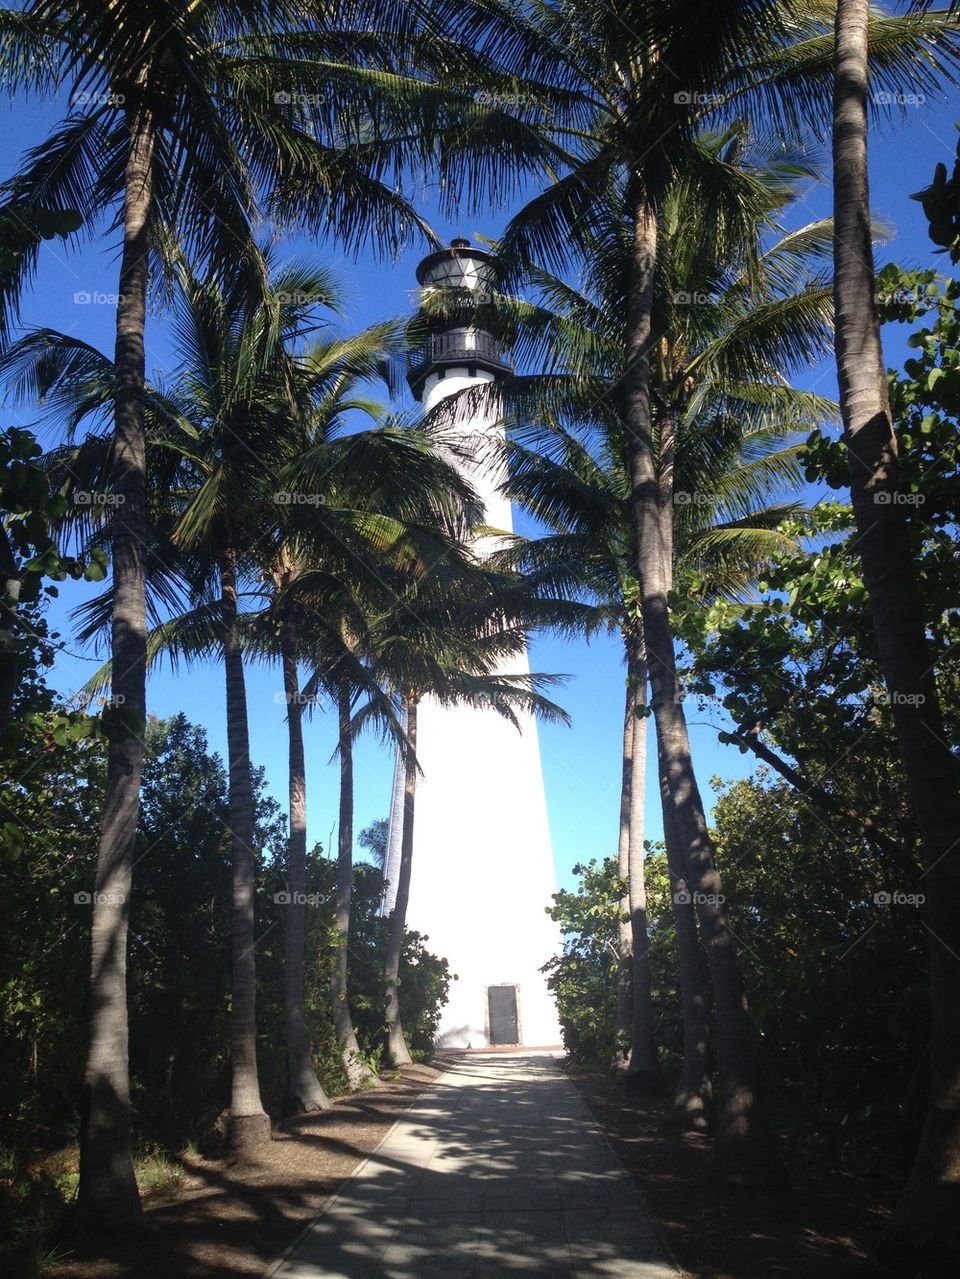 Lighthouse and Palm trees